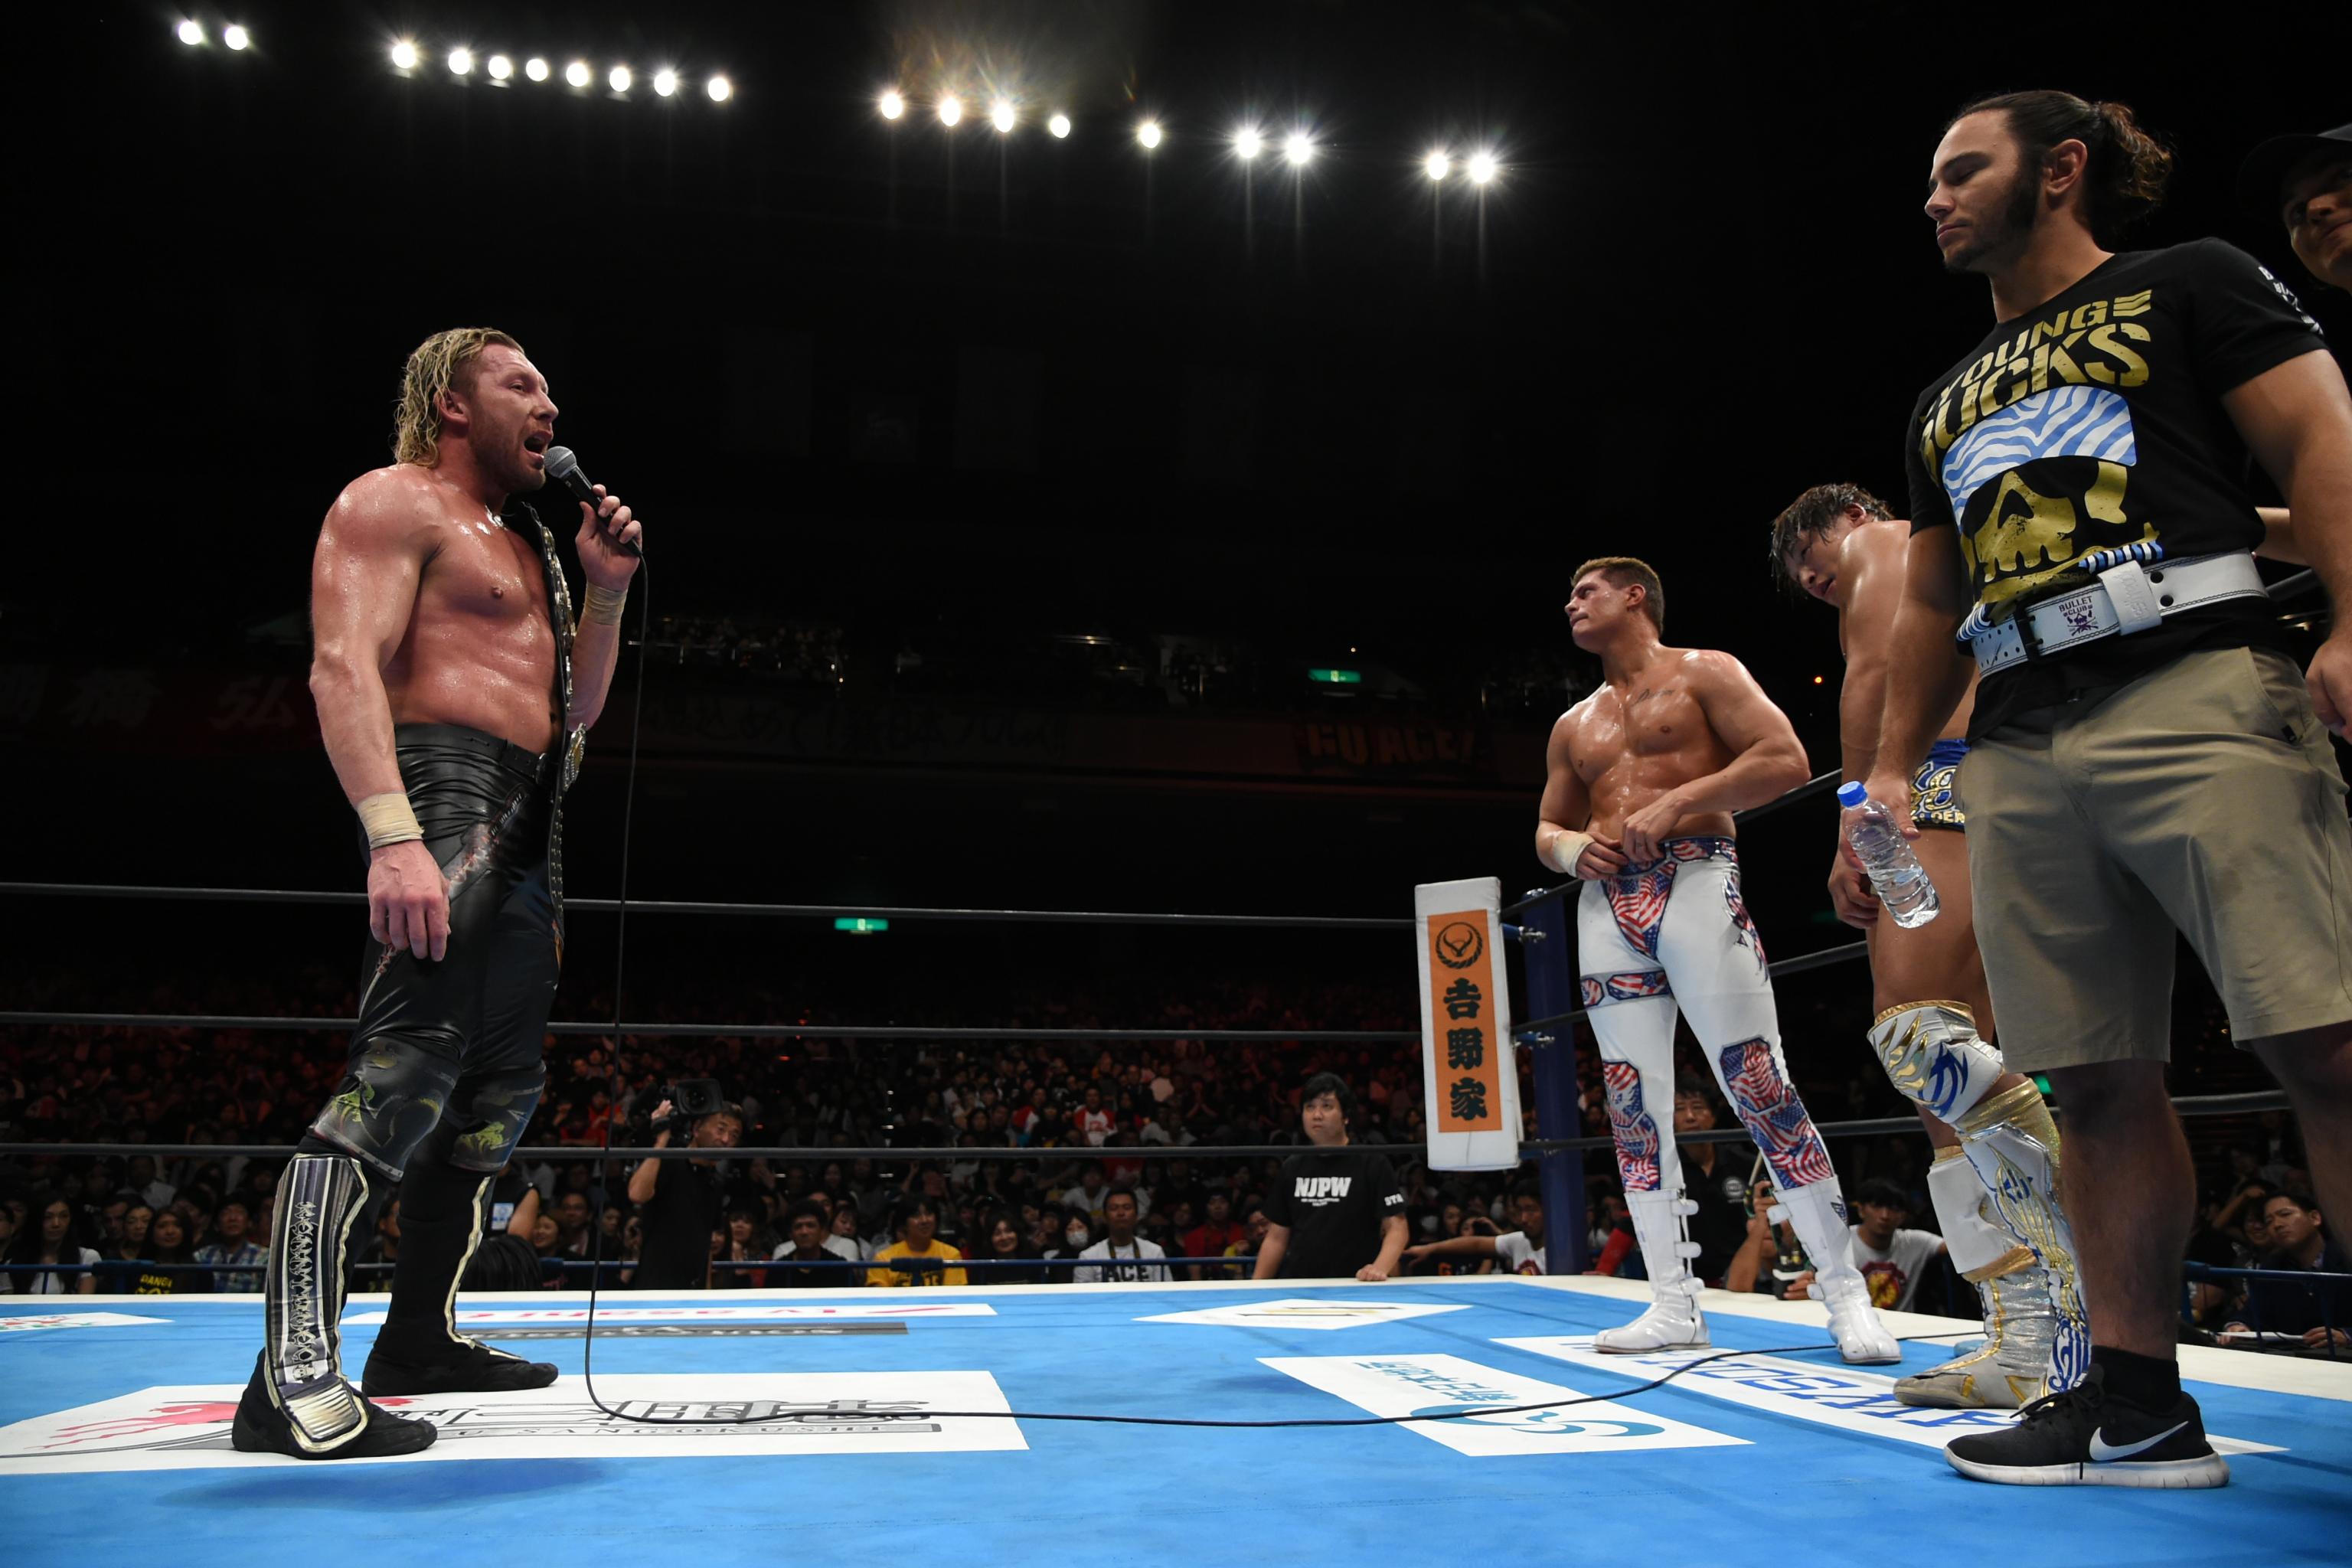 Kenny Omega Thinks a Large Percentage of WWE's Roster Wants to Join AEW